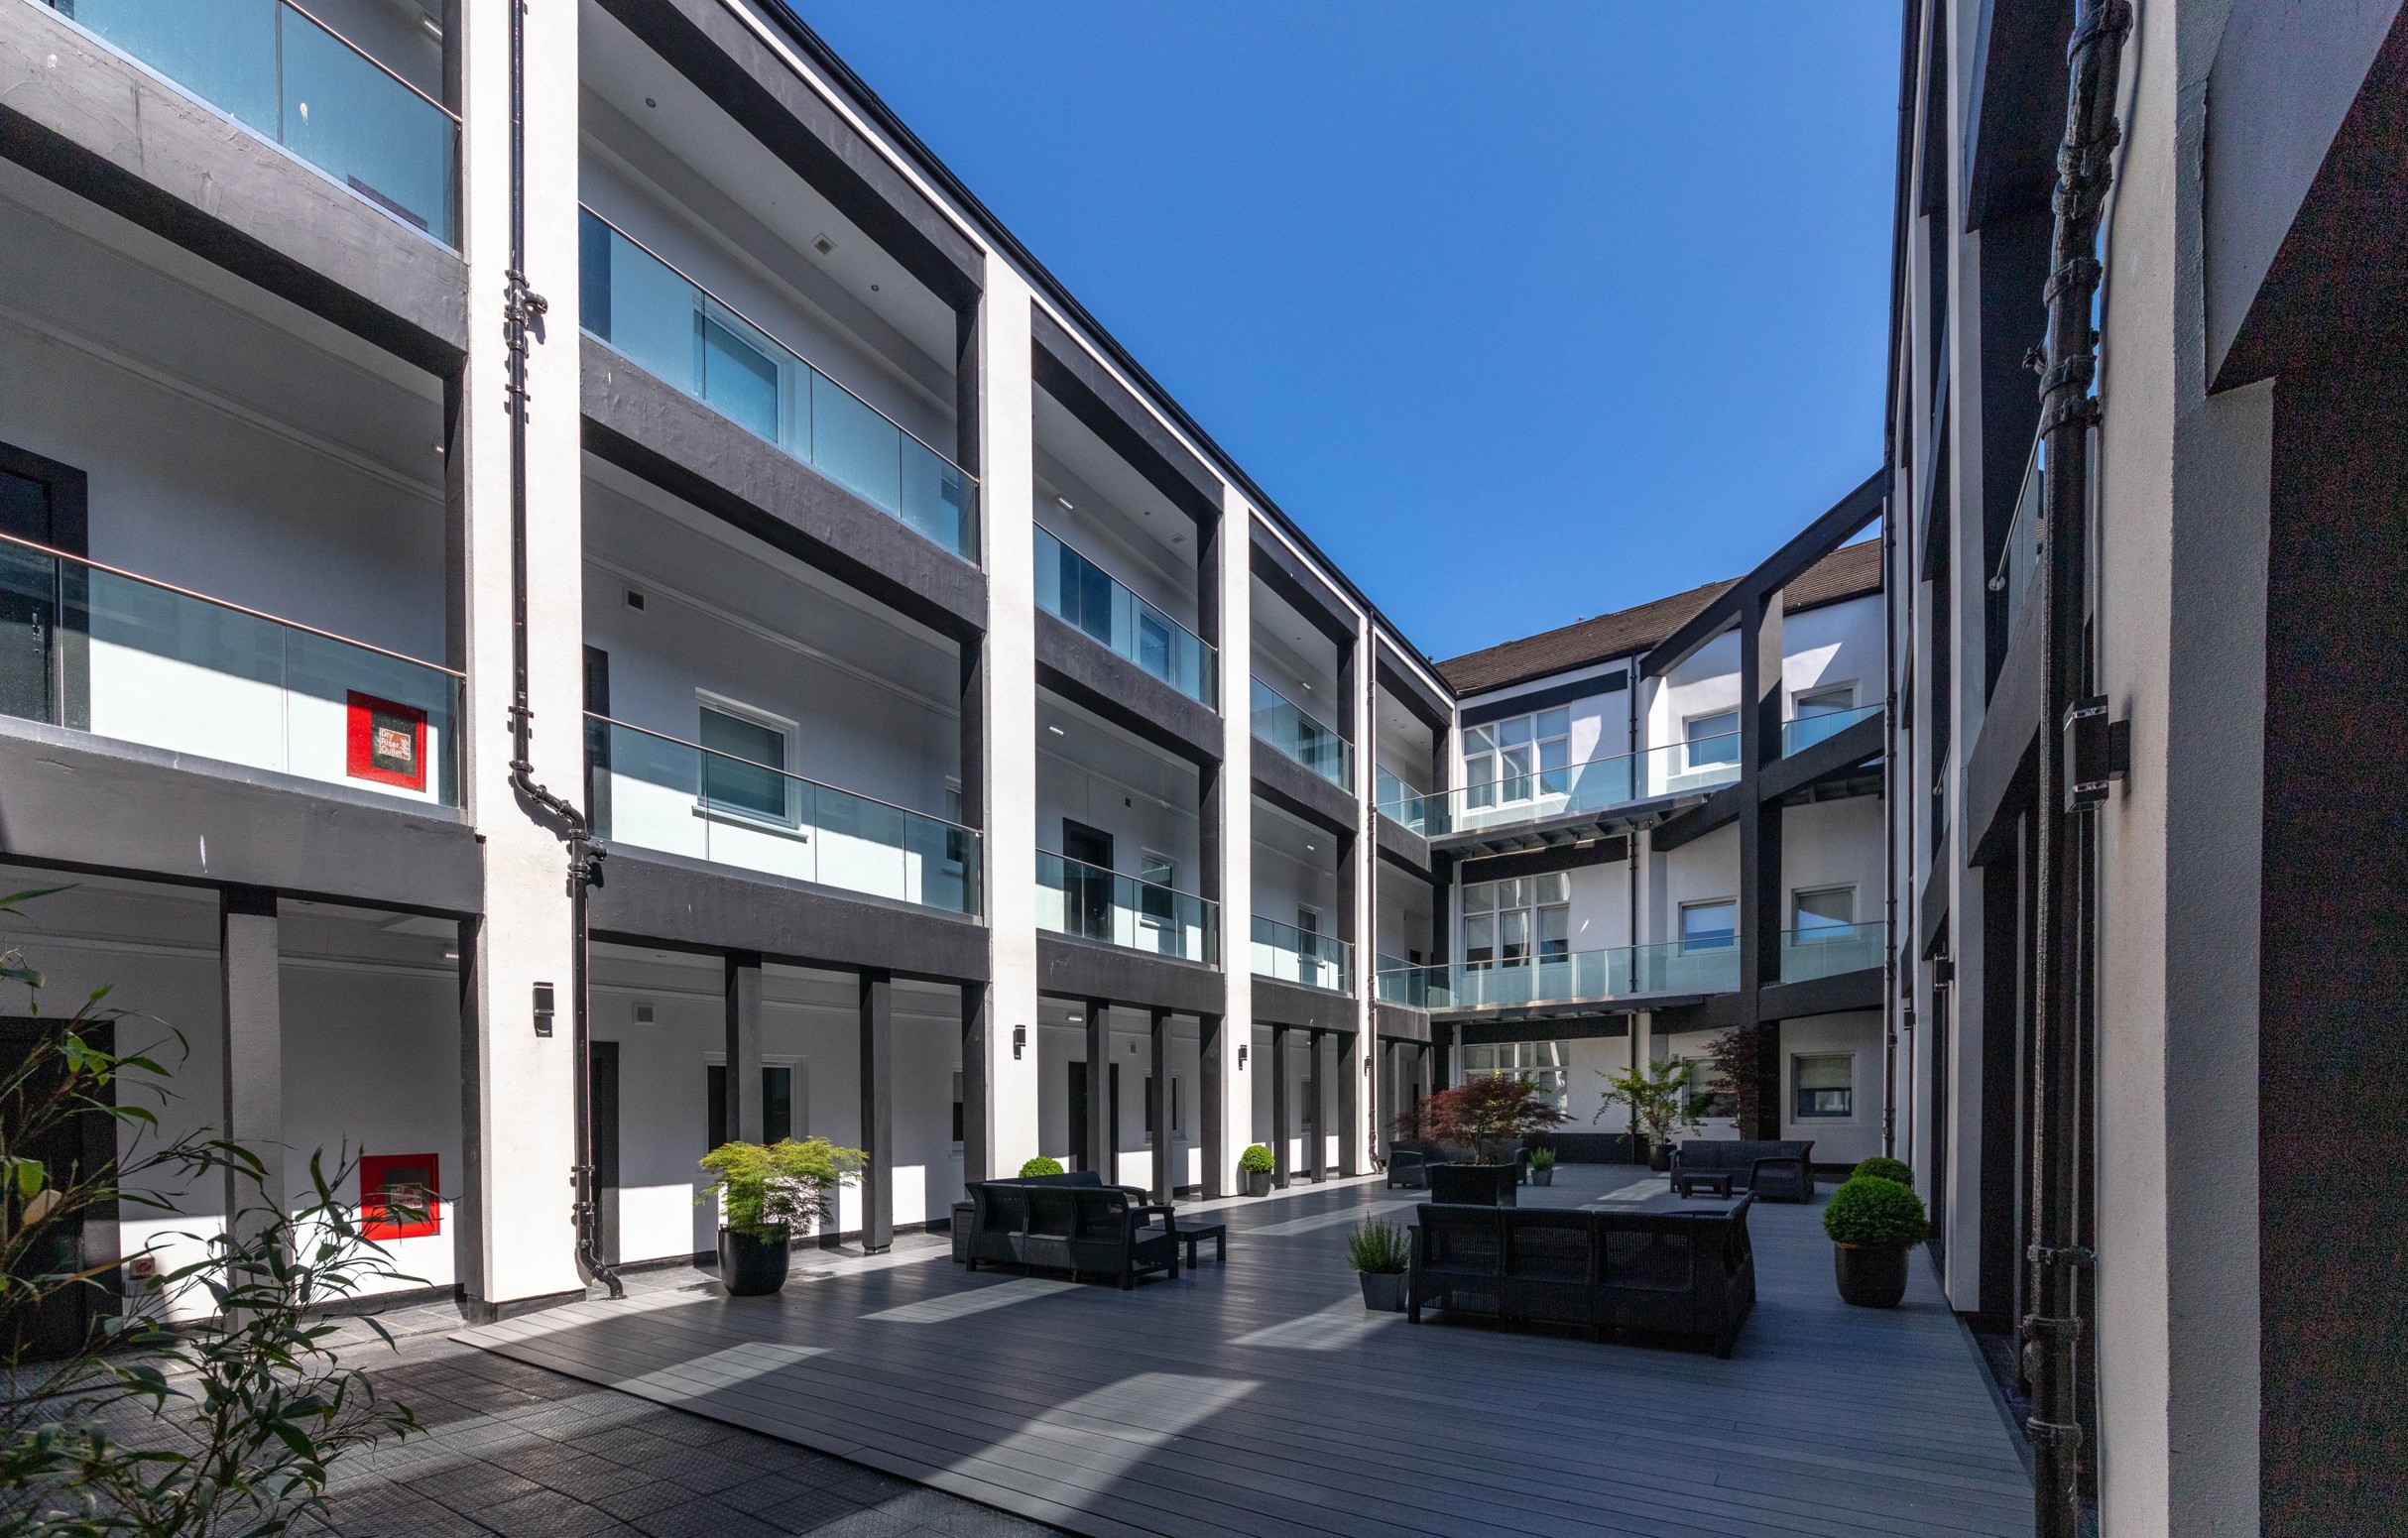 Construction completes on Glasgow’s first major Build to Rent development